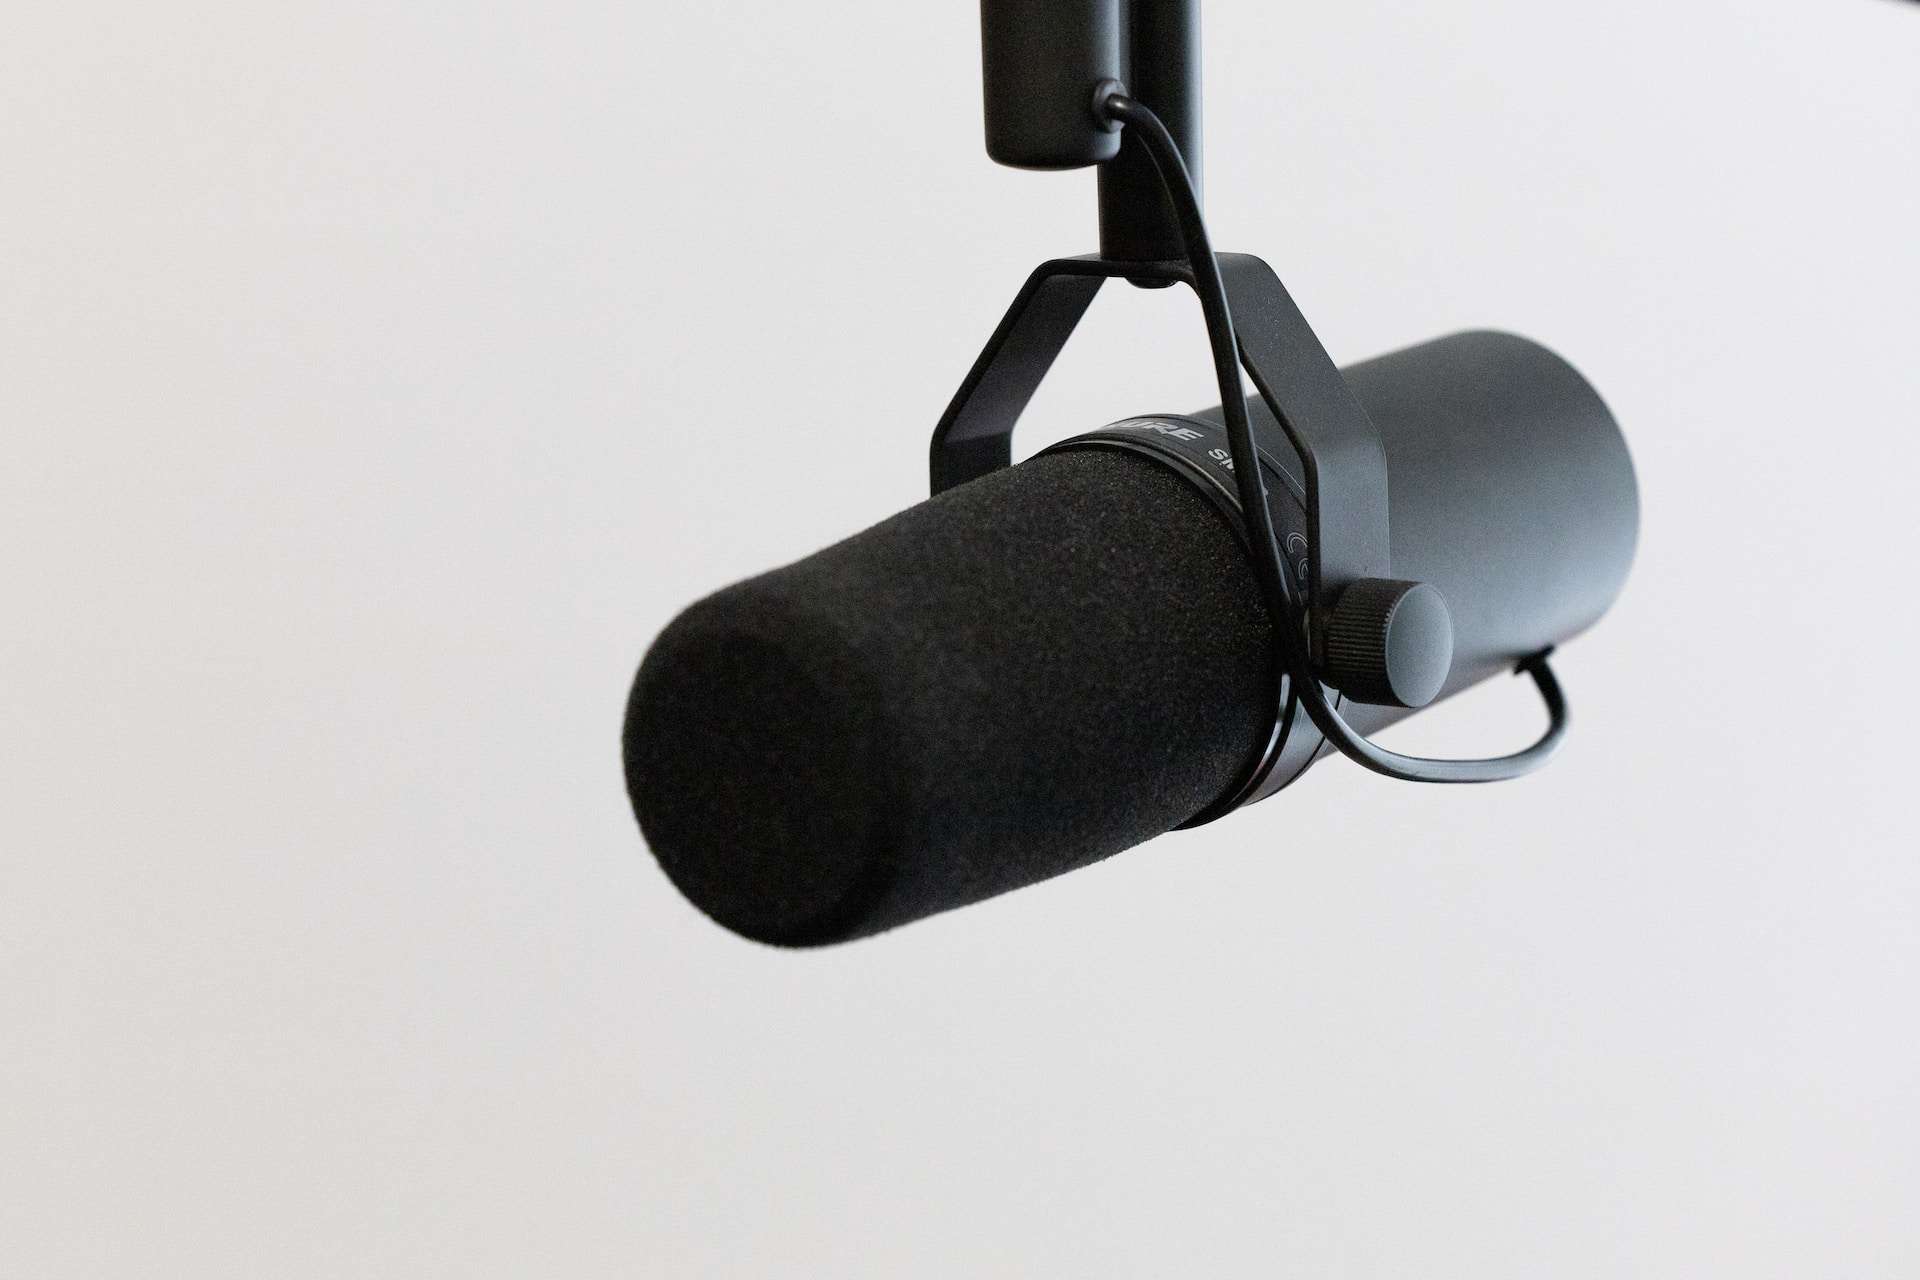 The Best USB Microphones for Podcasting